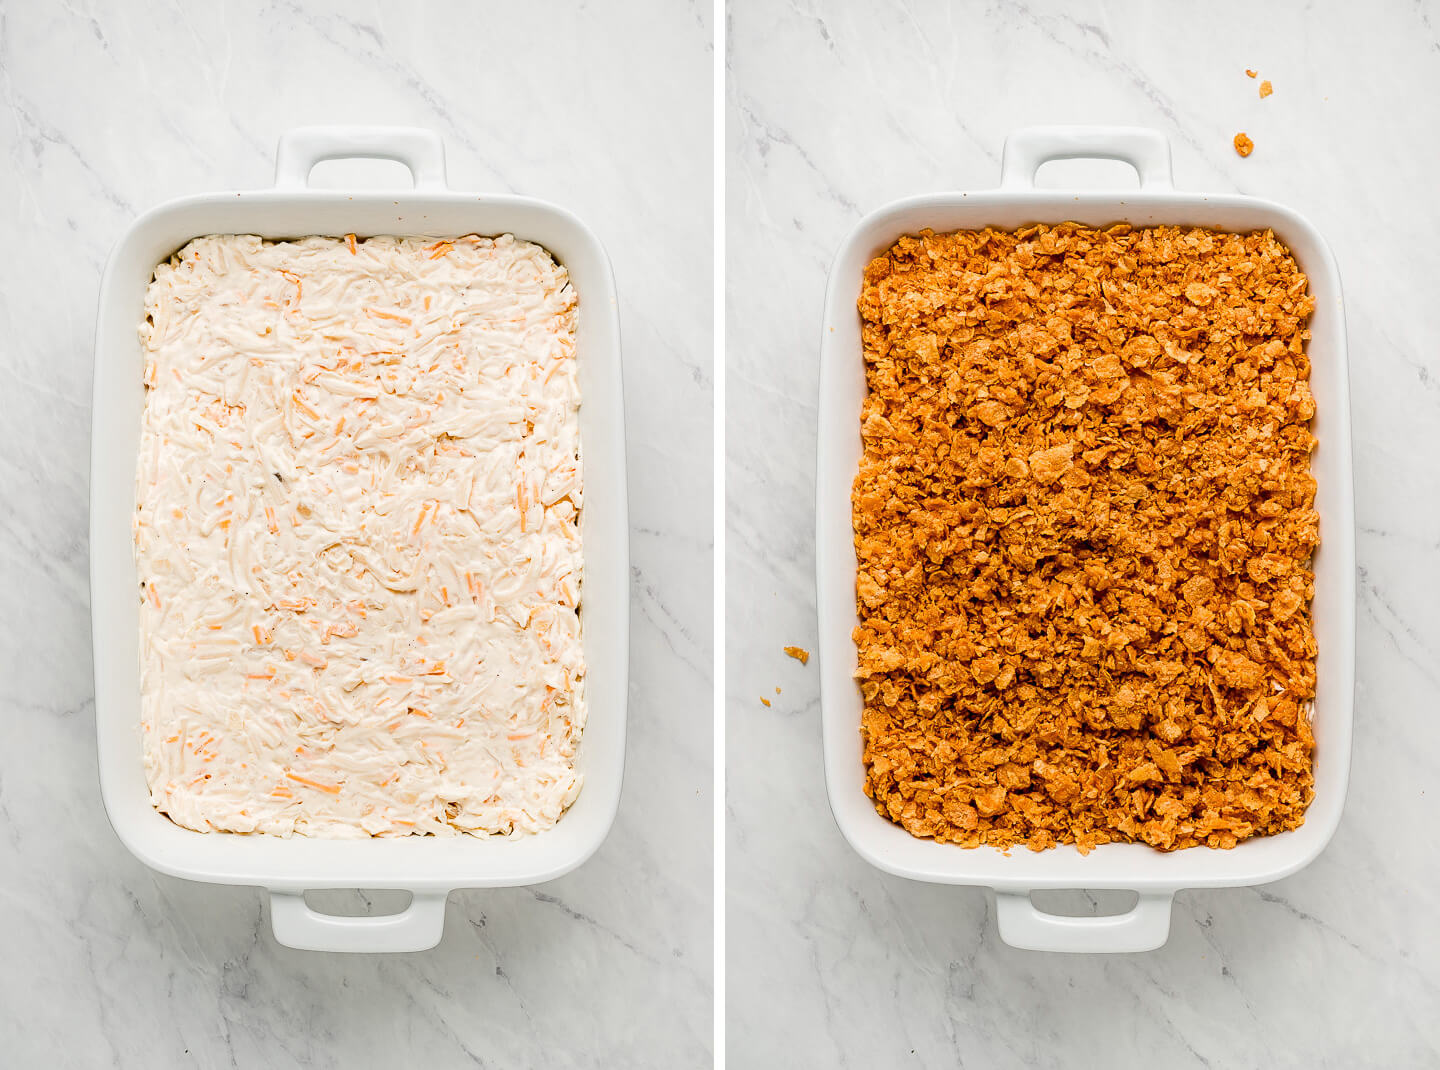 Diptych- A white baking dish with cream coated shredded potatoes and cheese; topped with cornflakes.